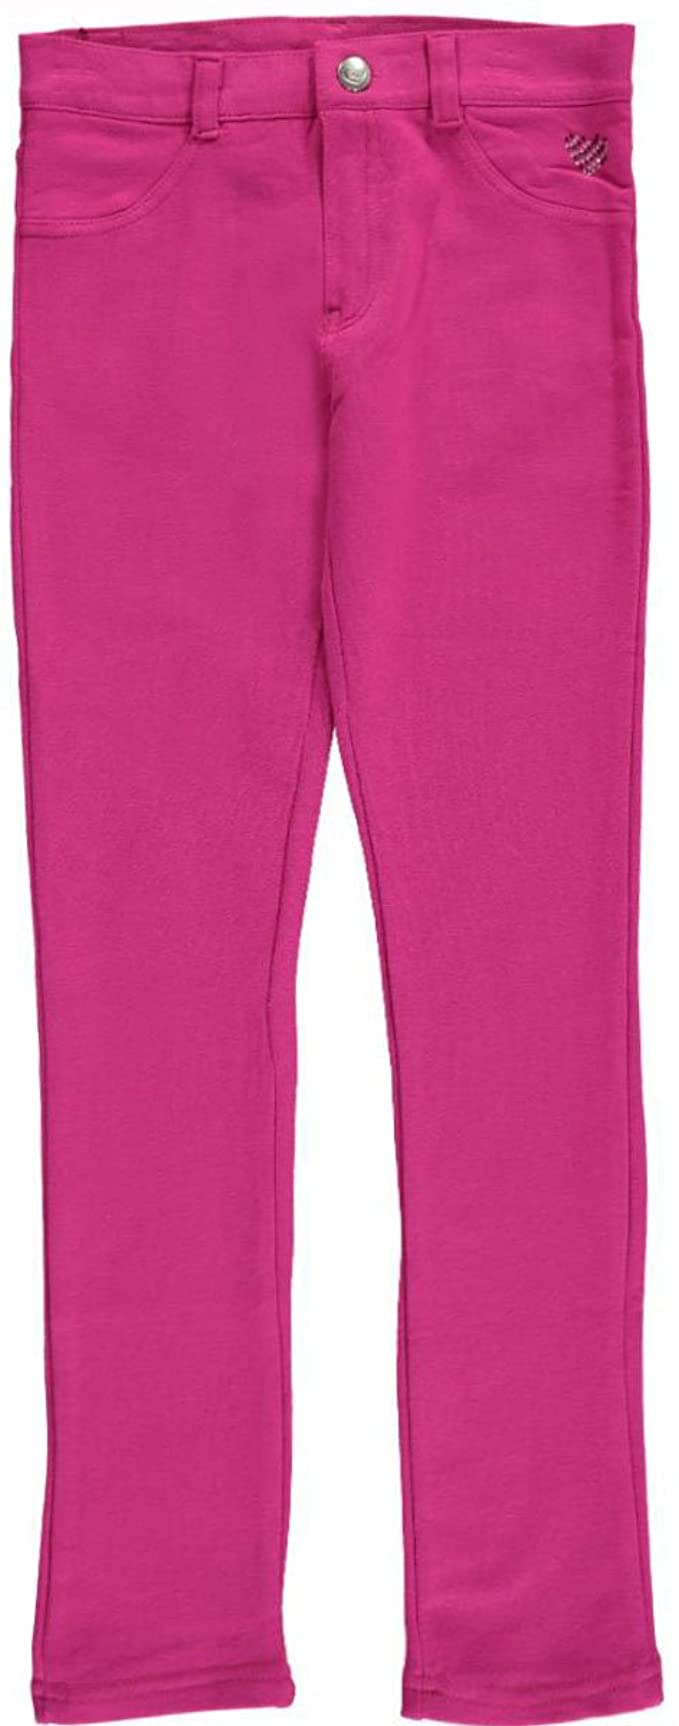 Pink Jeggings for girls. Has back pockets. Knit material. – TERRA COTTA  BOUTIQUE / www.